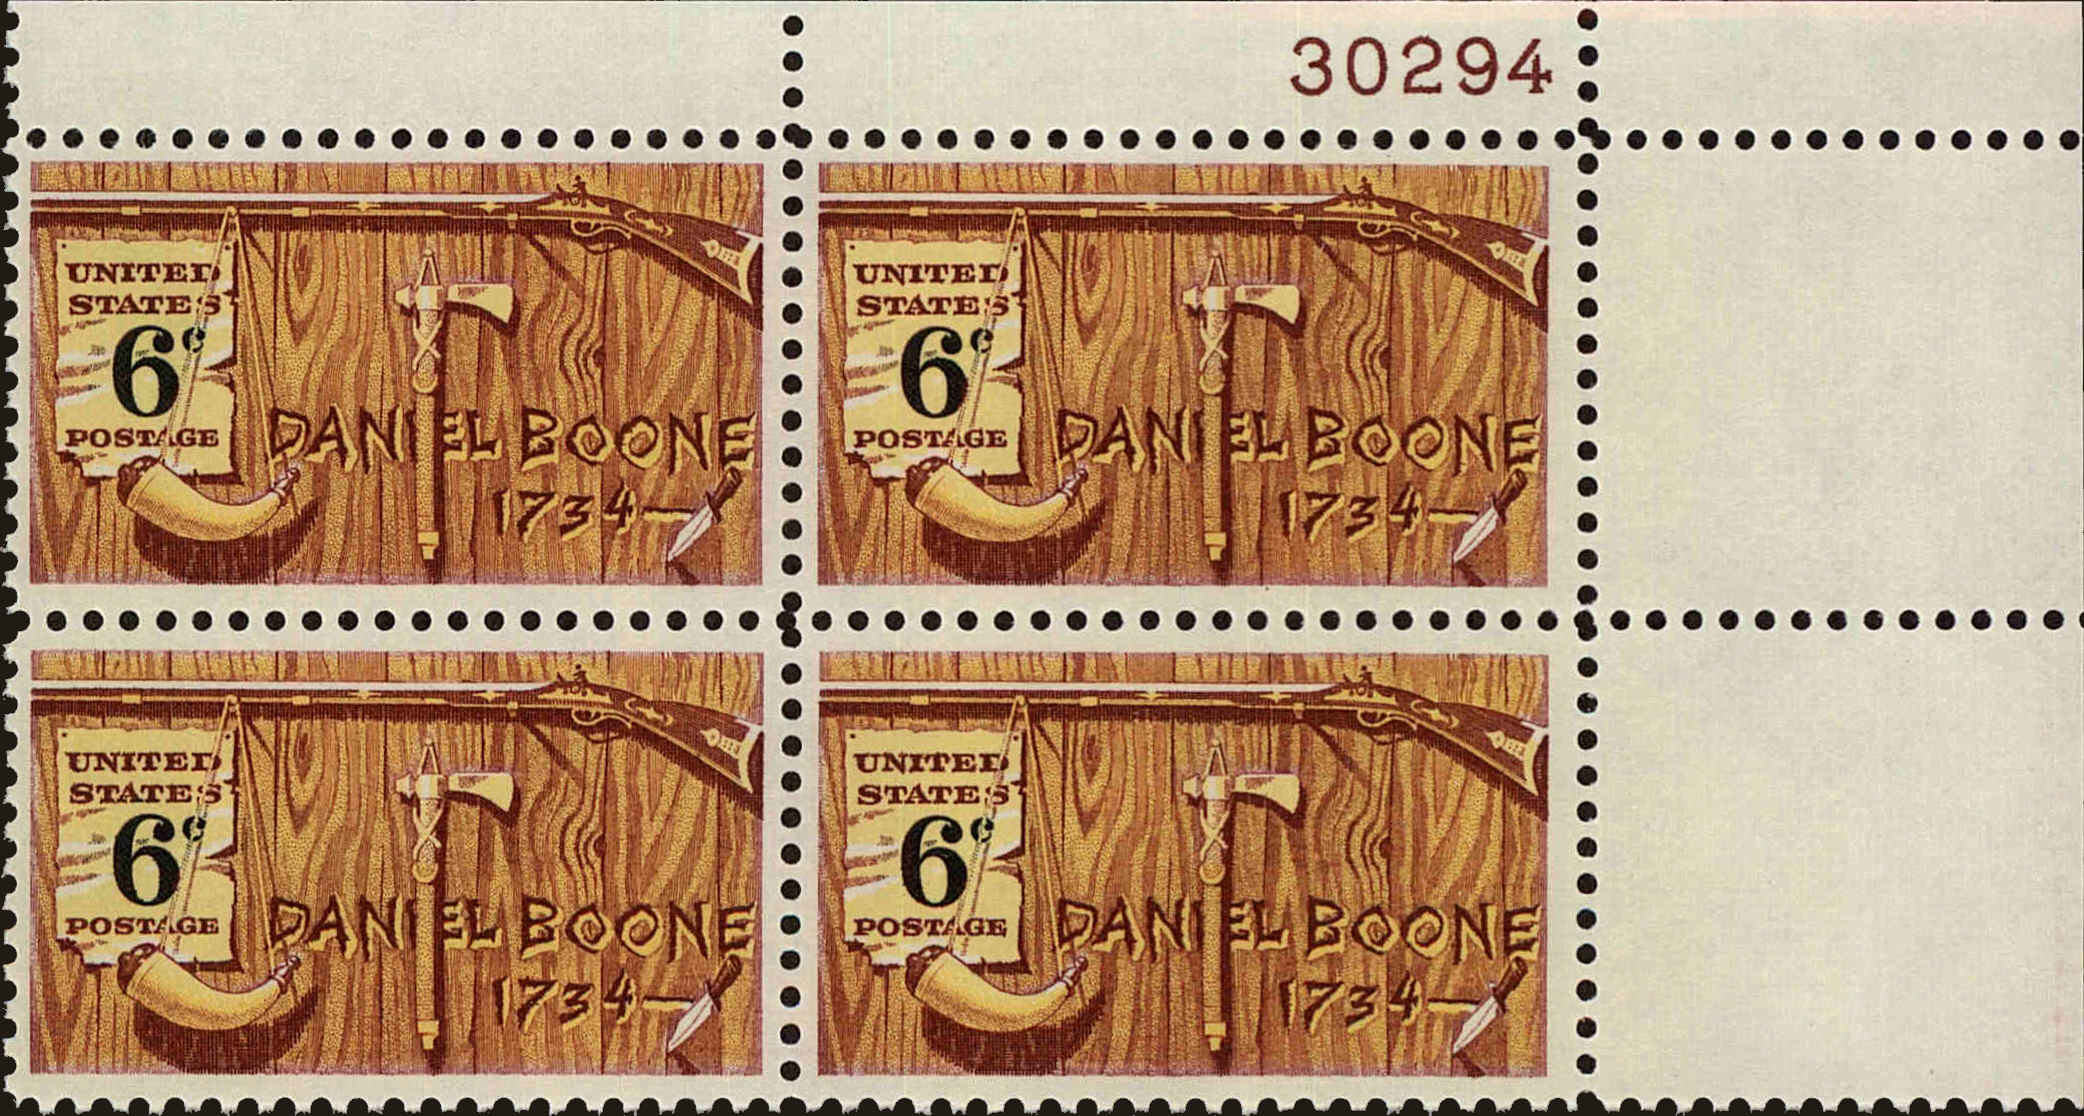 Front view of United States 1357 collectors stamp